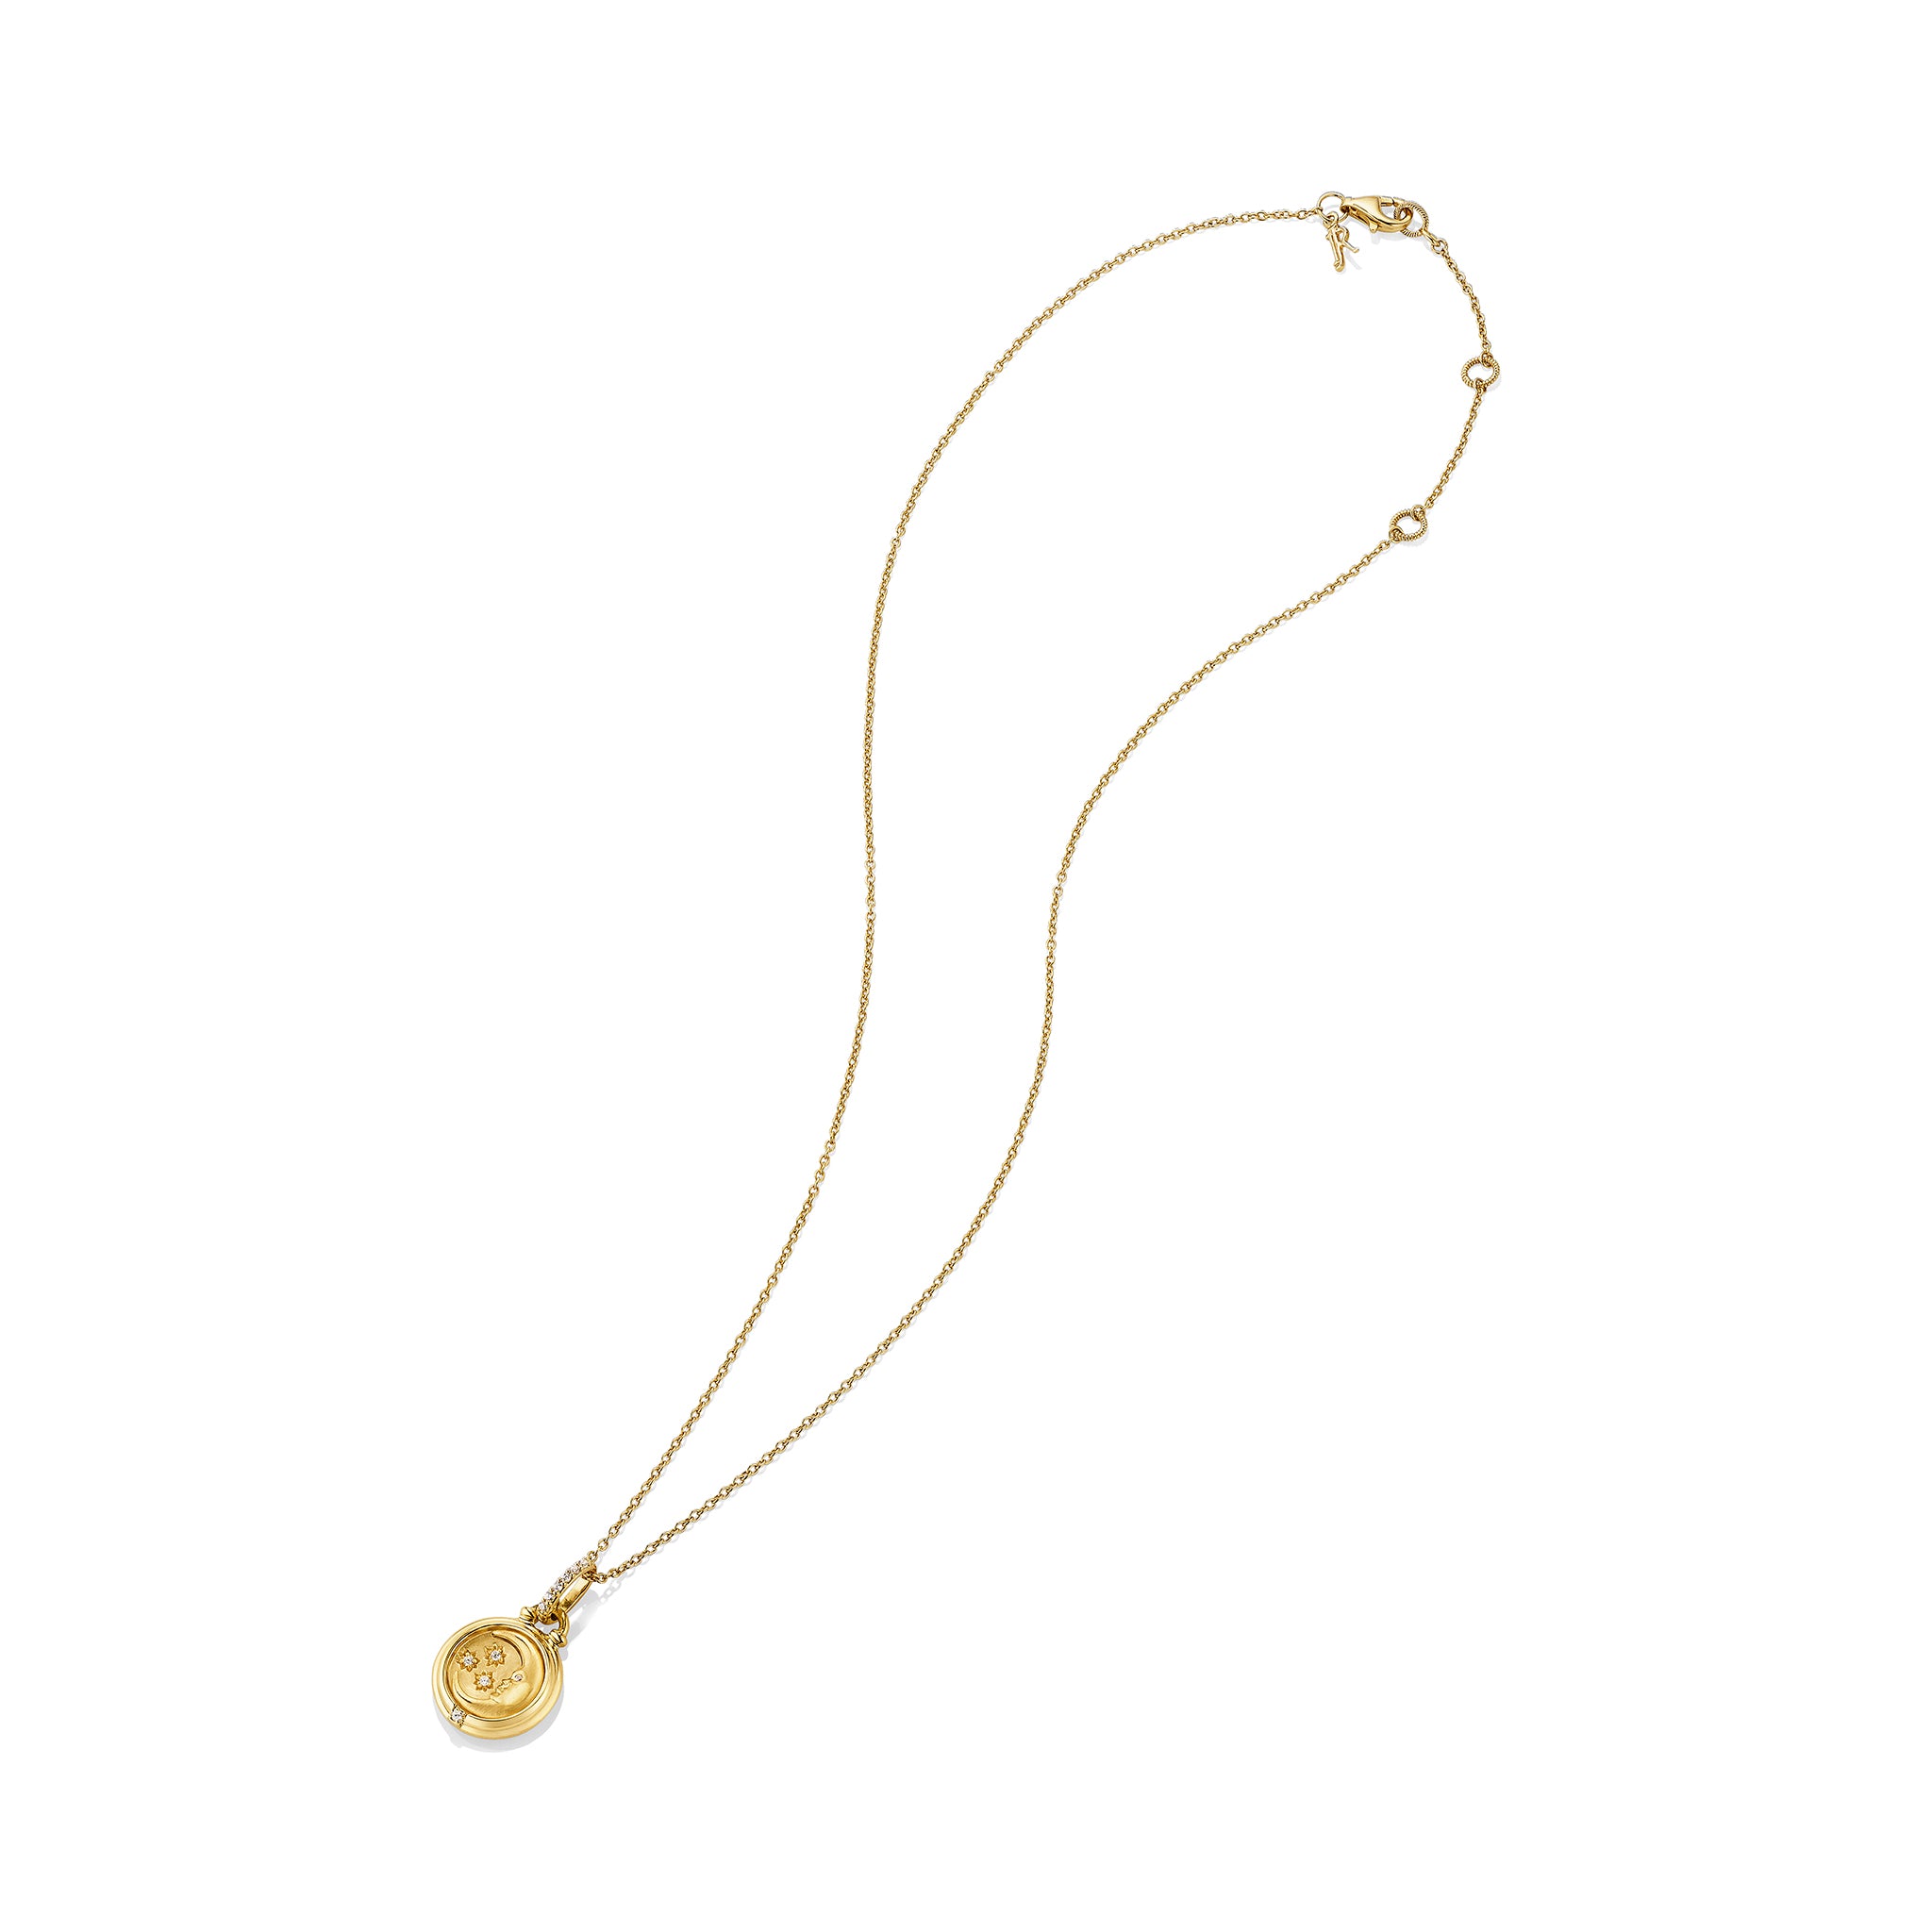 Little Luxuries Moon and Stars Medallion Necklace with Diamonds in 18K